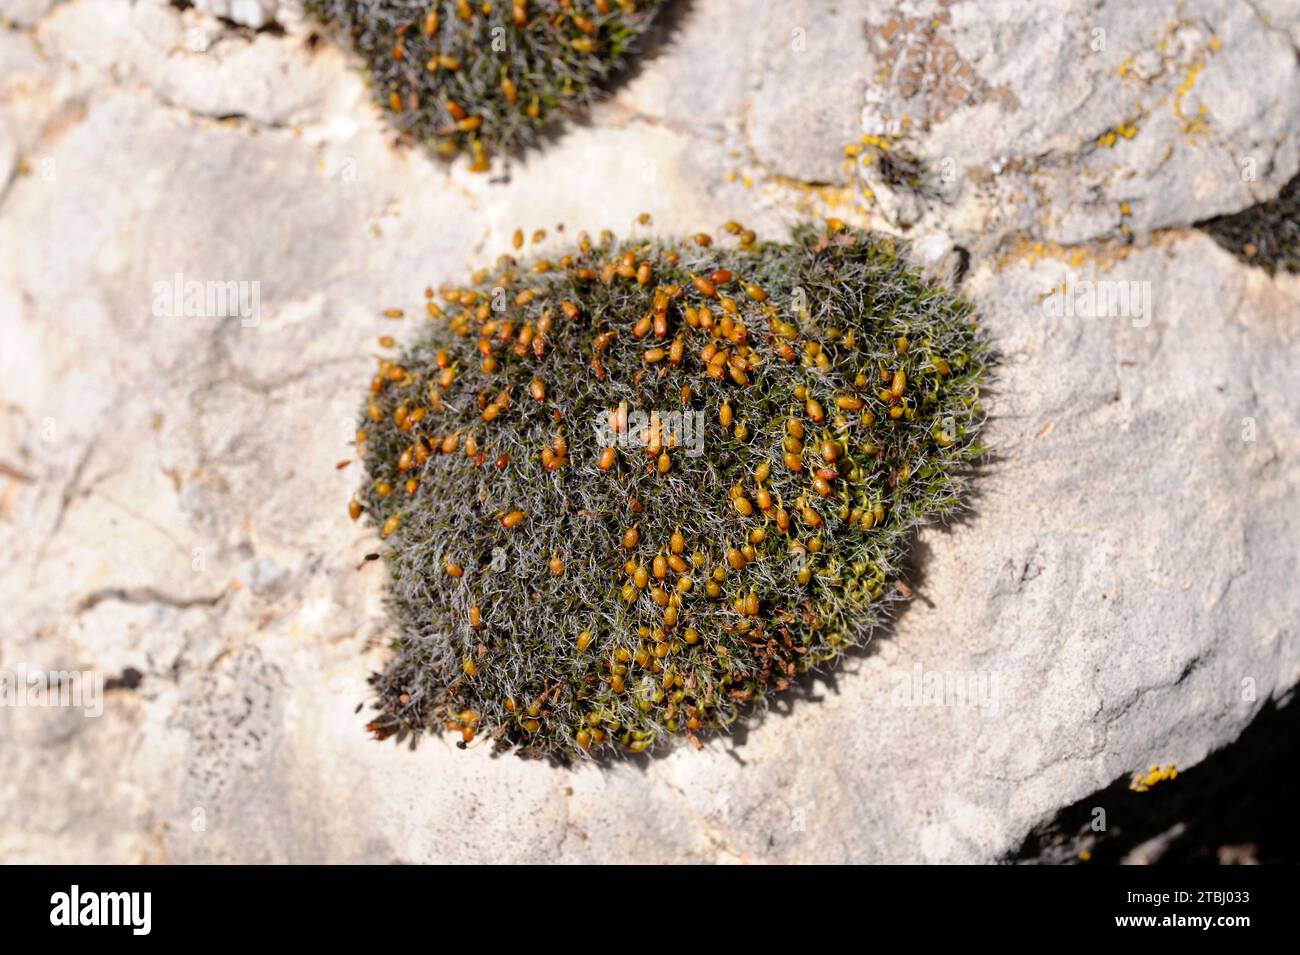 Grey-cushioned grimmia (Grimmia pulvinata) is a cushion moss present in all temperate regions. This photo was taken in Sierra de Cazorla Natural Park, Stock Photo